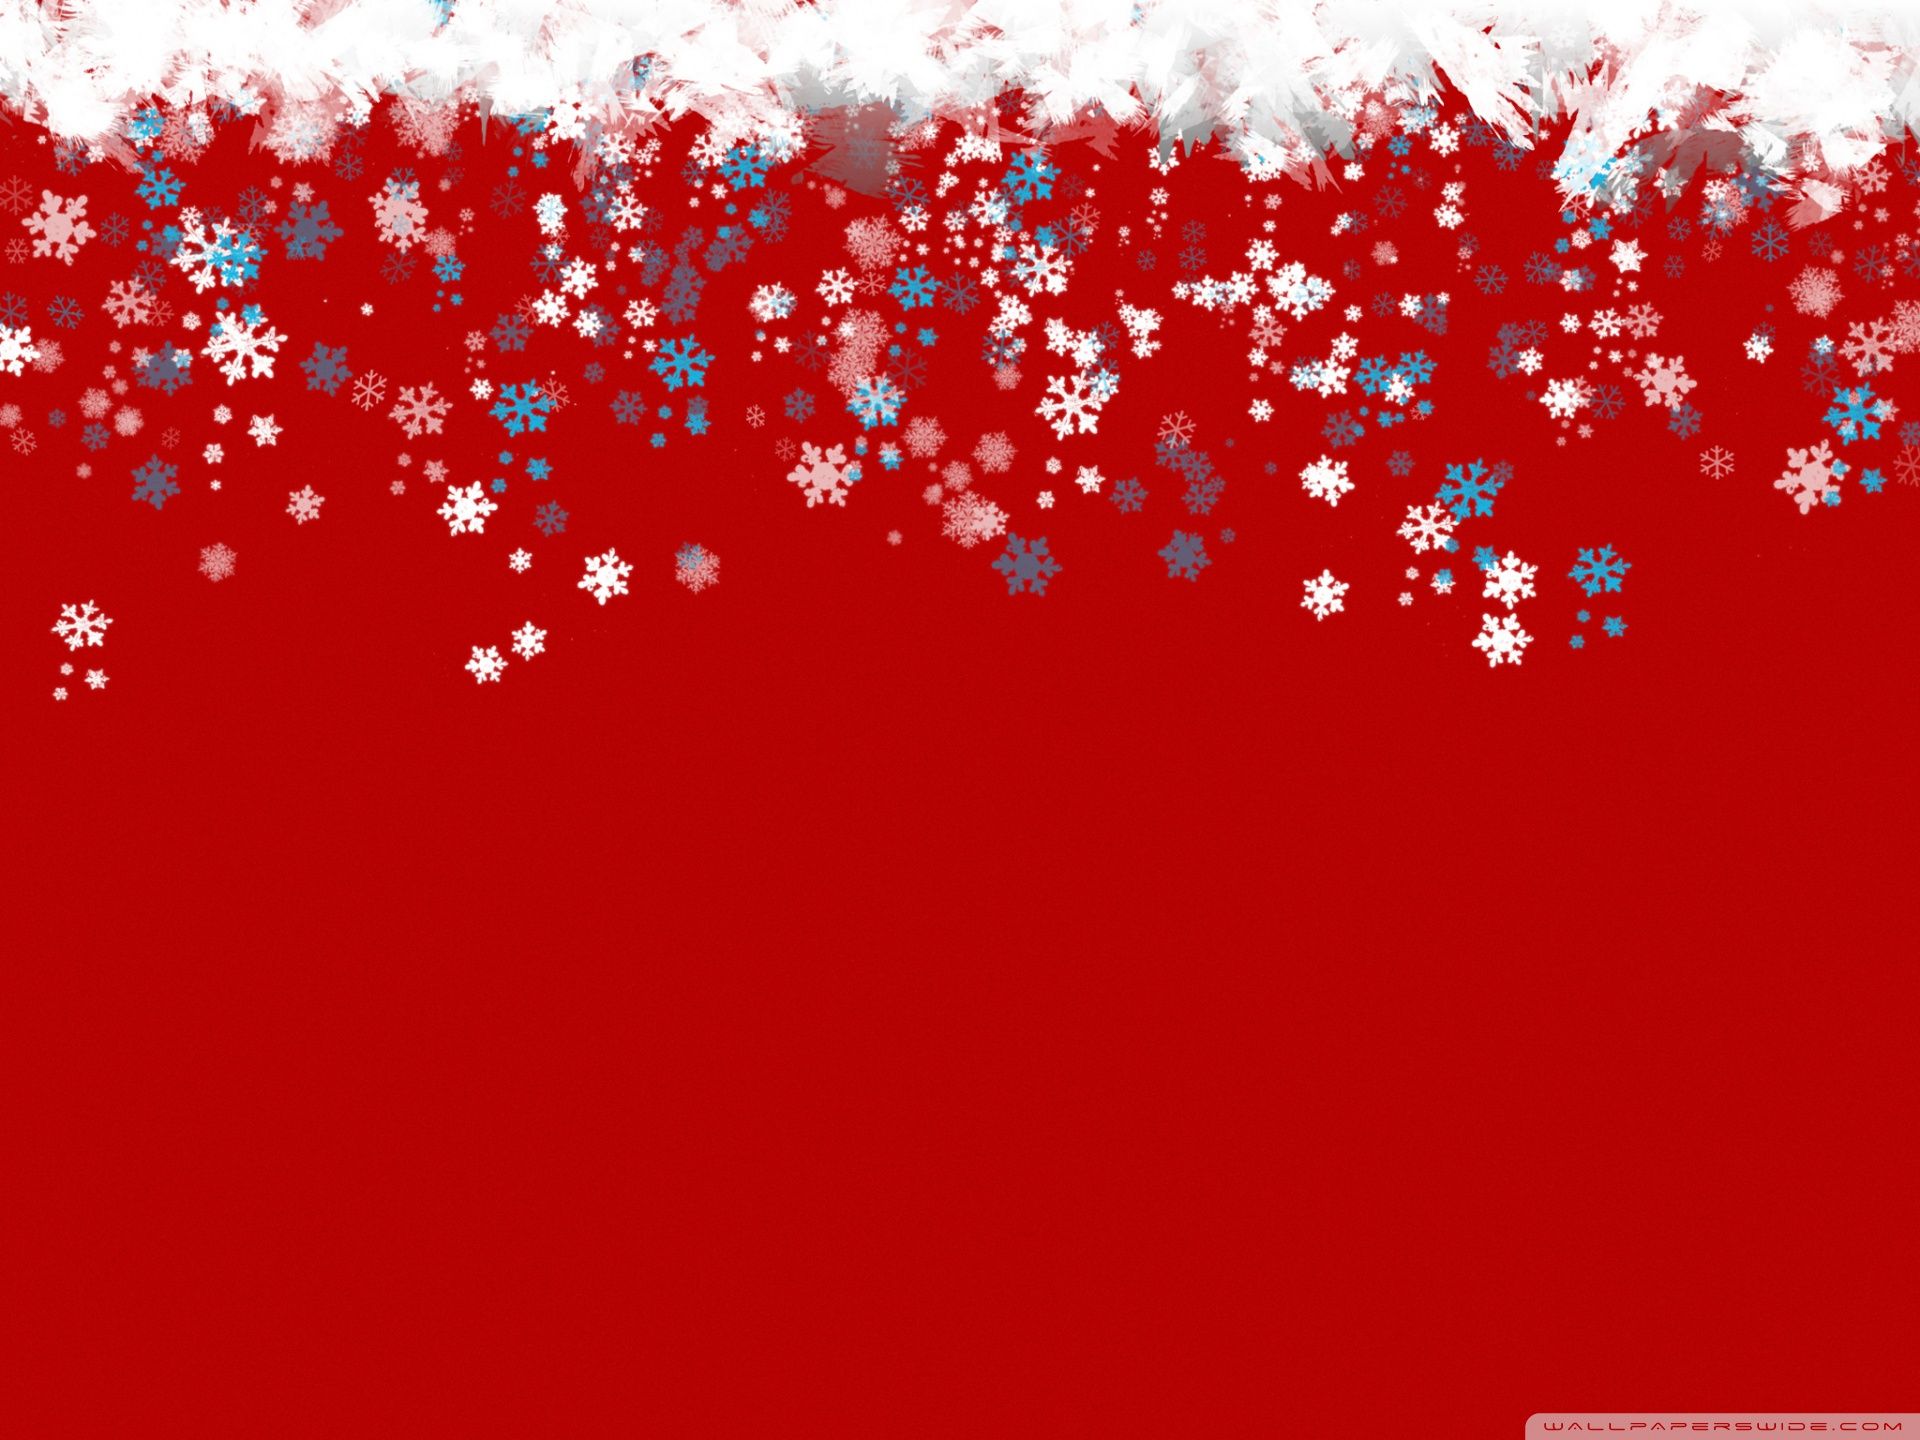 Snowflakes Ultra HD Desktop Background Wallpaper for: Multi Display, Dual Monitor, Tablet